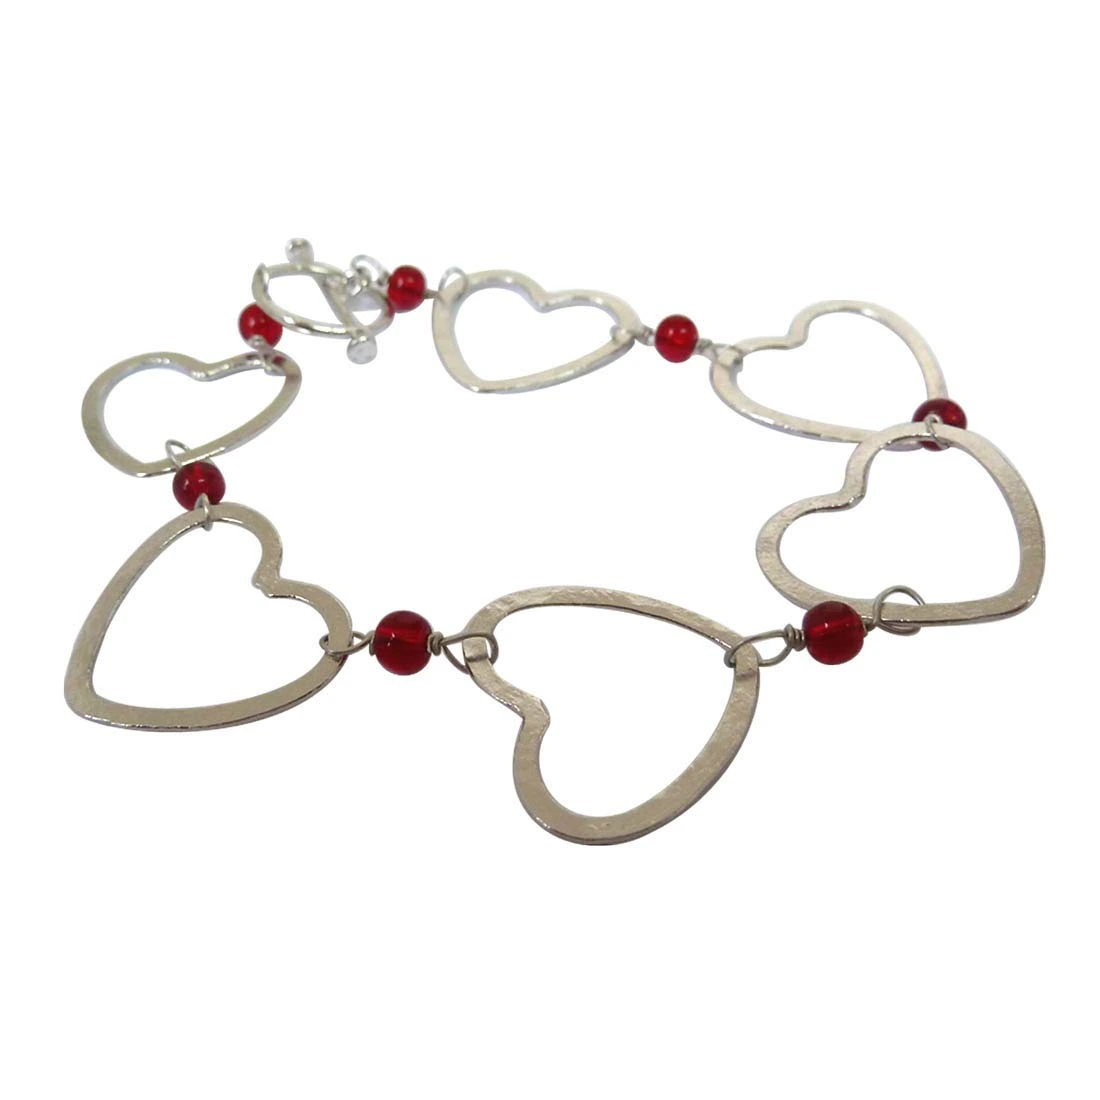 Modern & Stylish Silver Plated Heart Shape with Red Beads Bracelet (SDS163)